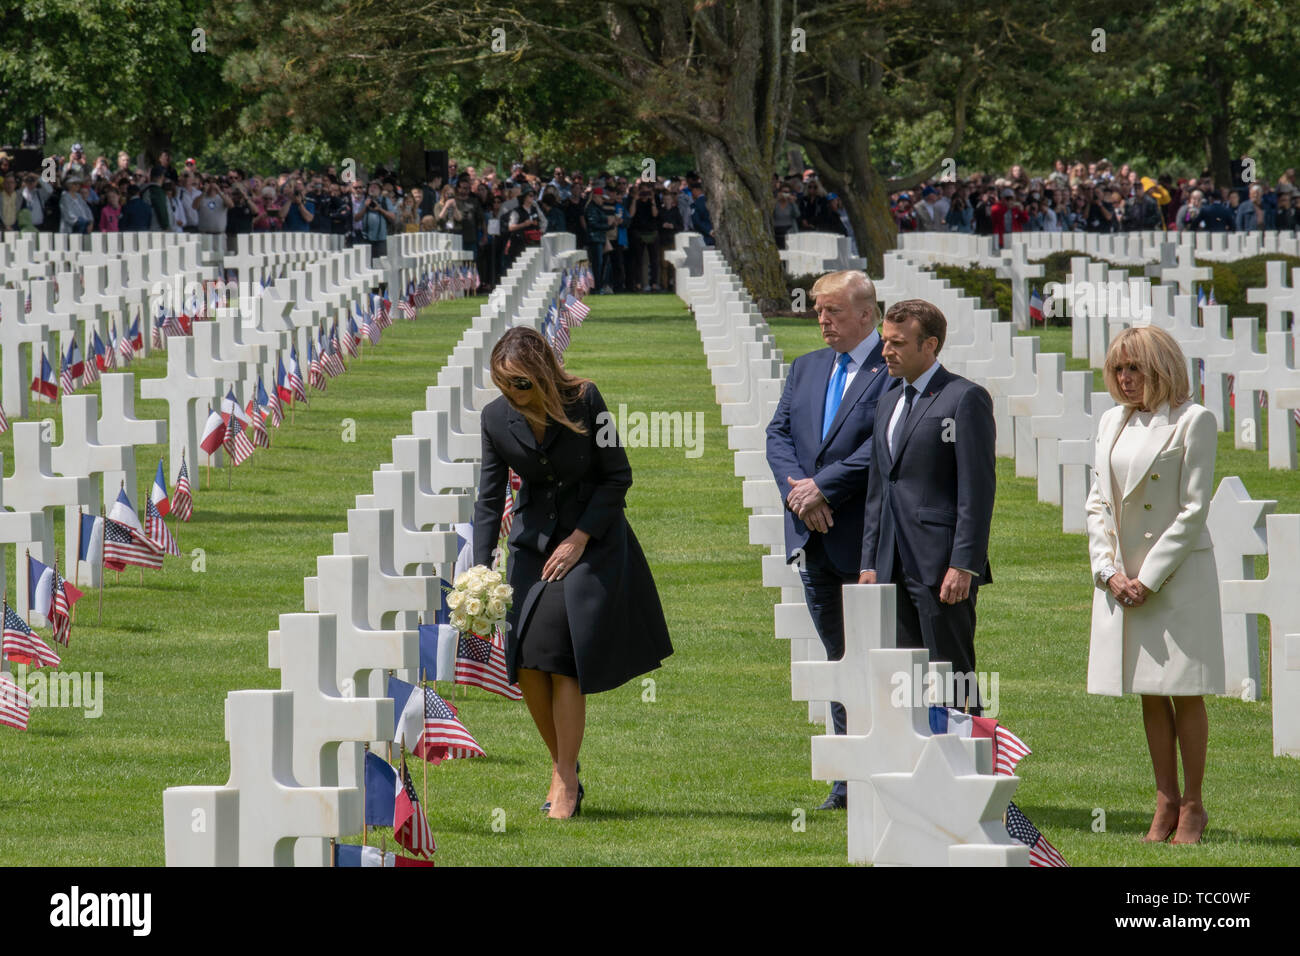 U.S. First Lady Melania Trump places flowers at the grave of an American  service member buried at the Normandy American Cemetery as President Donald  Trump/ French President Emmanuel Macron and his wife